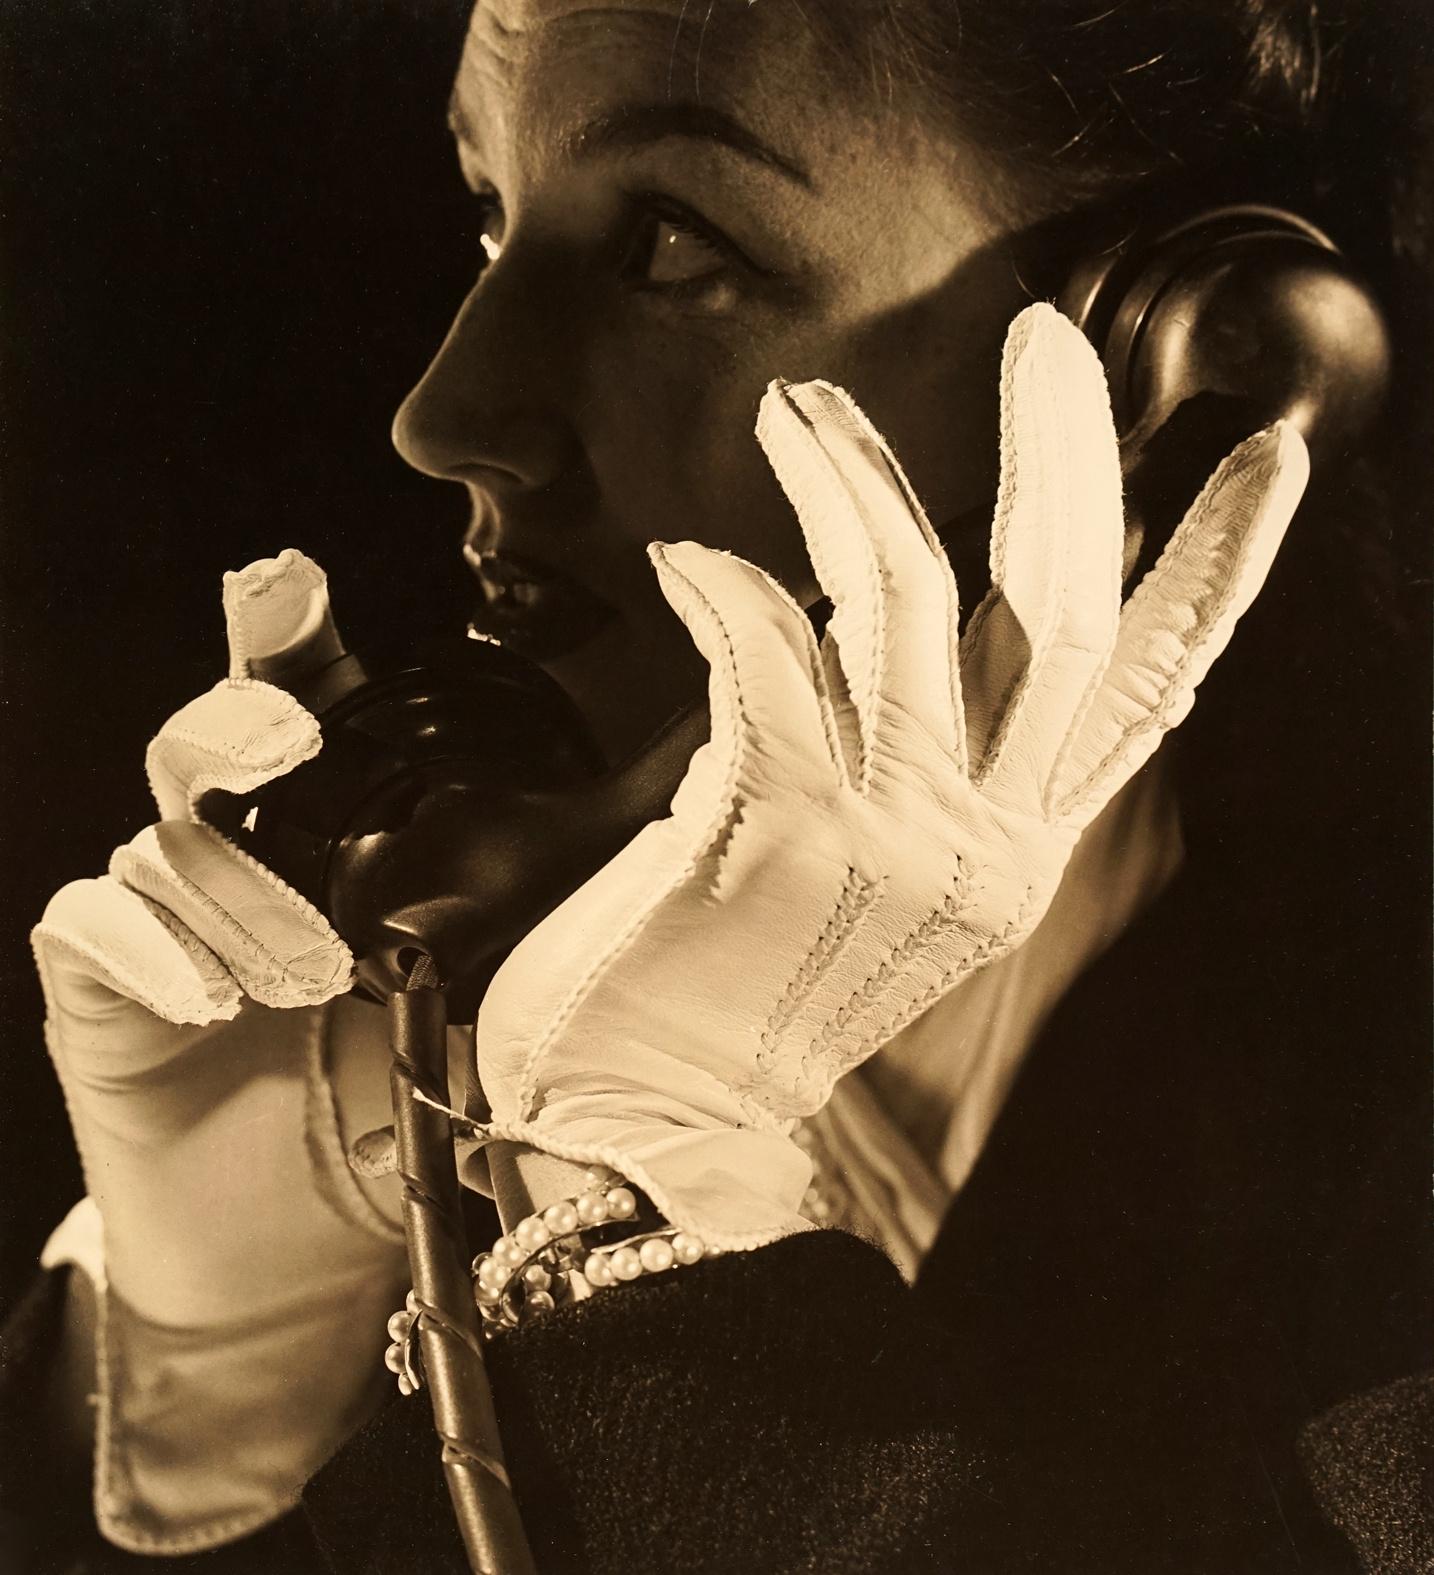 Constantin Joffe Black and White Photograph - Woman With White Gloves on Phone, 1940's